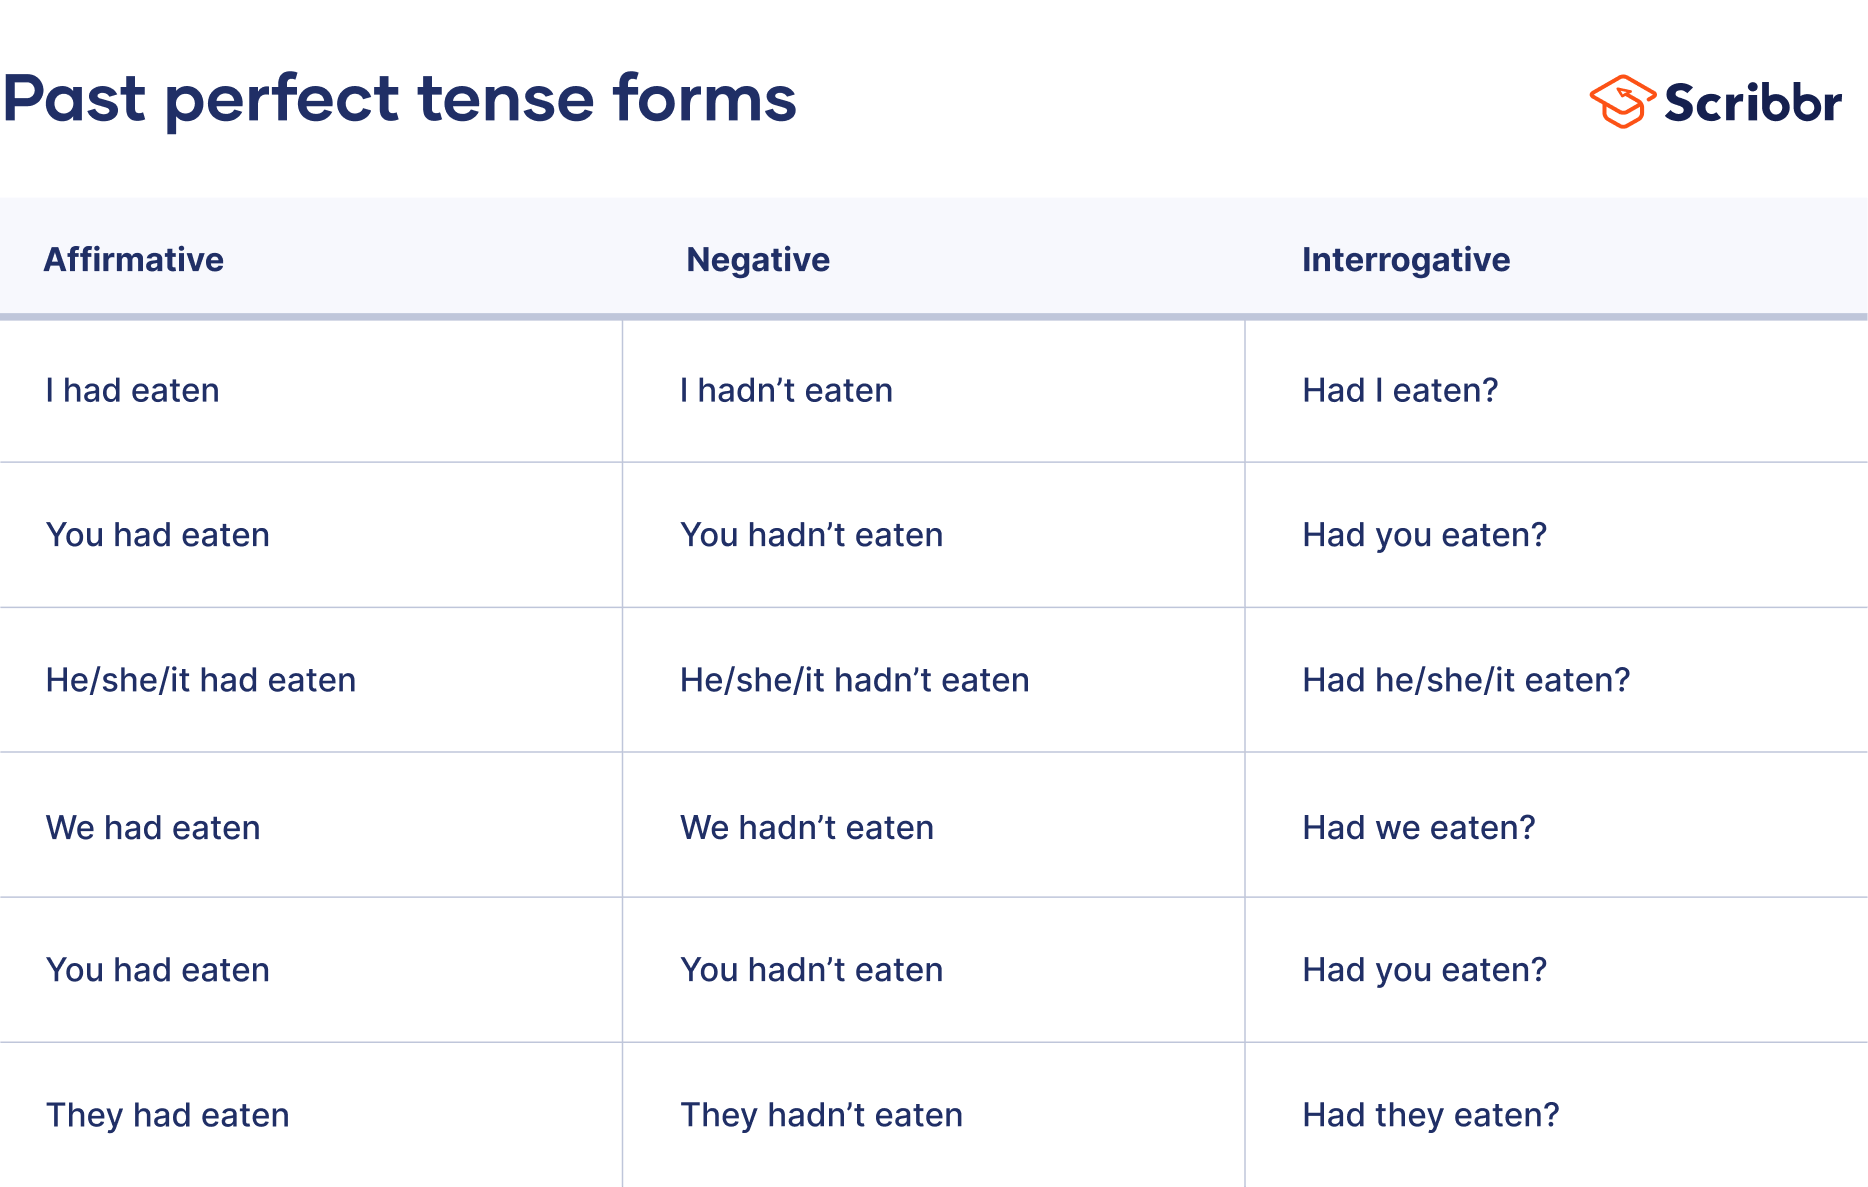 Past perfect tense forms